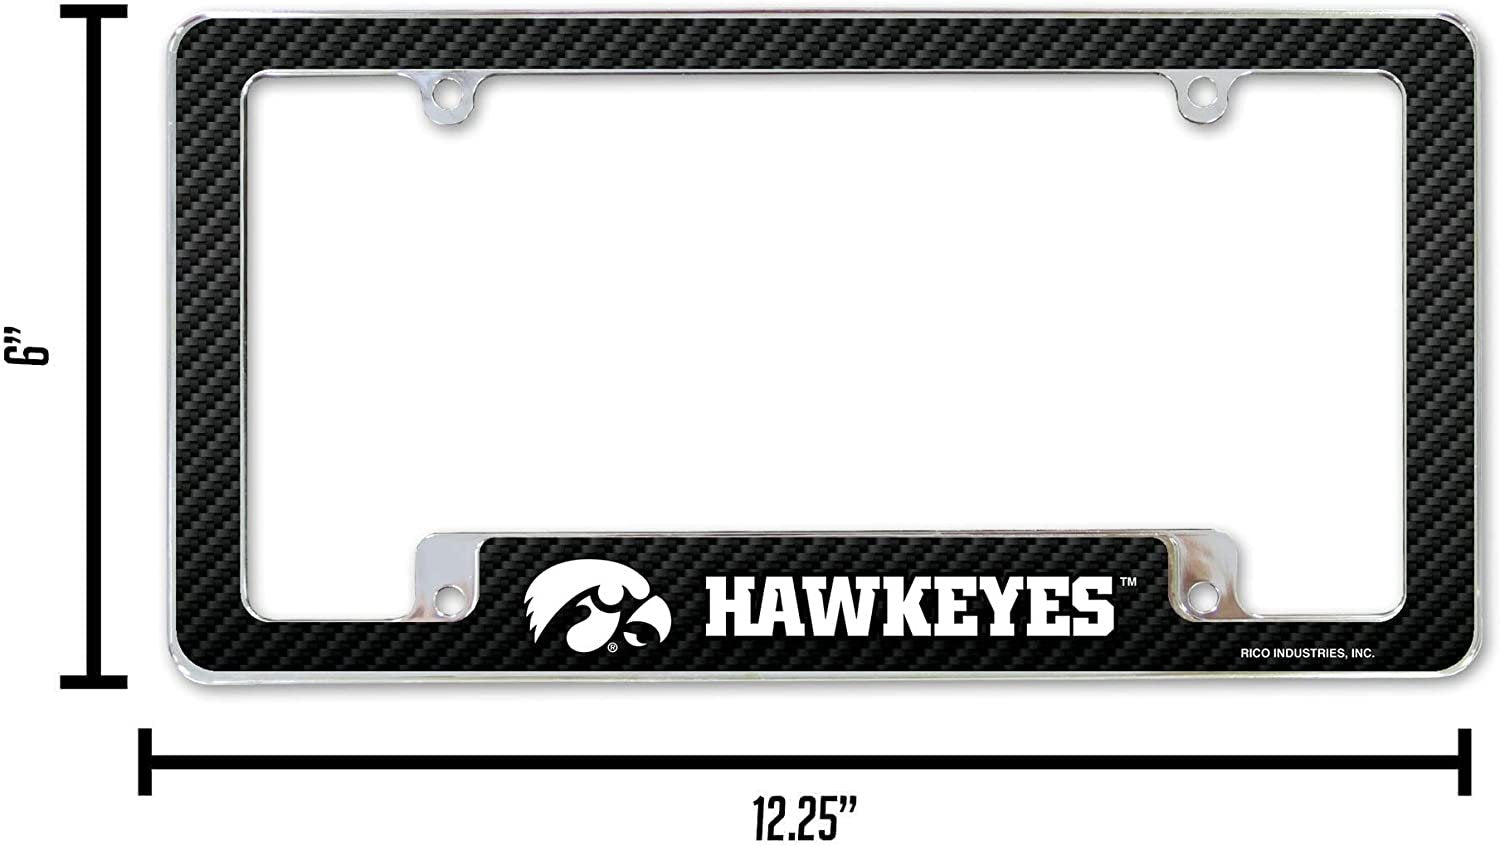 University of Iowa Hawkeyes Metal License Plate Frame Chrome Tag Cover 12x6 Inch Carbon Fiber Design